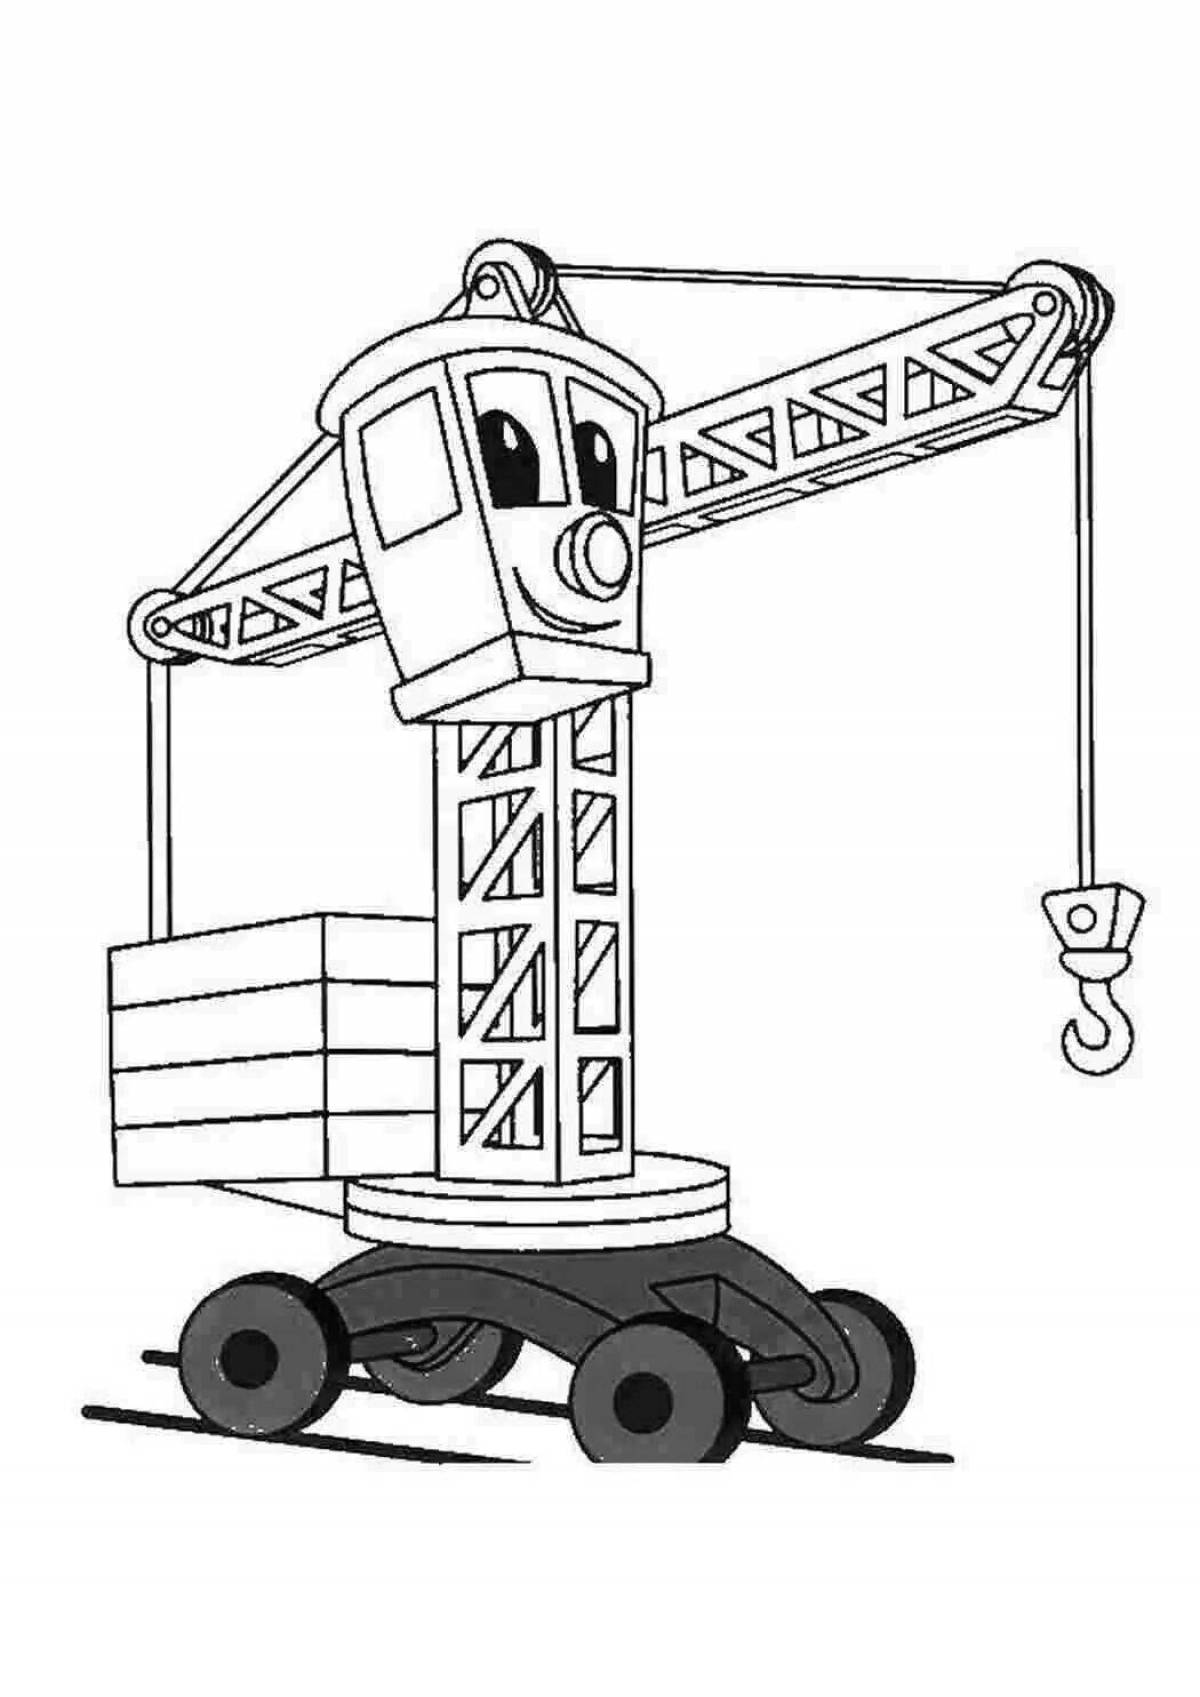 Playful crane coloring page for kids